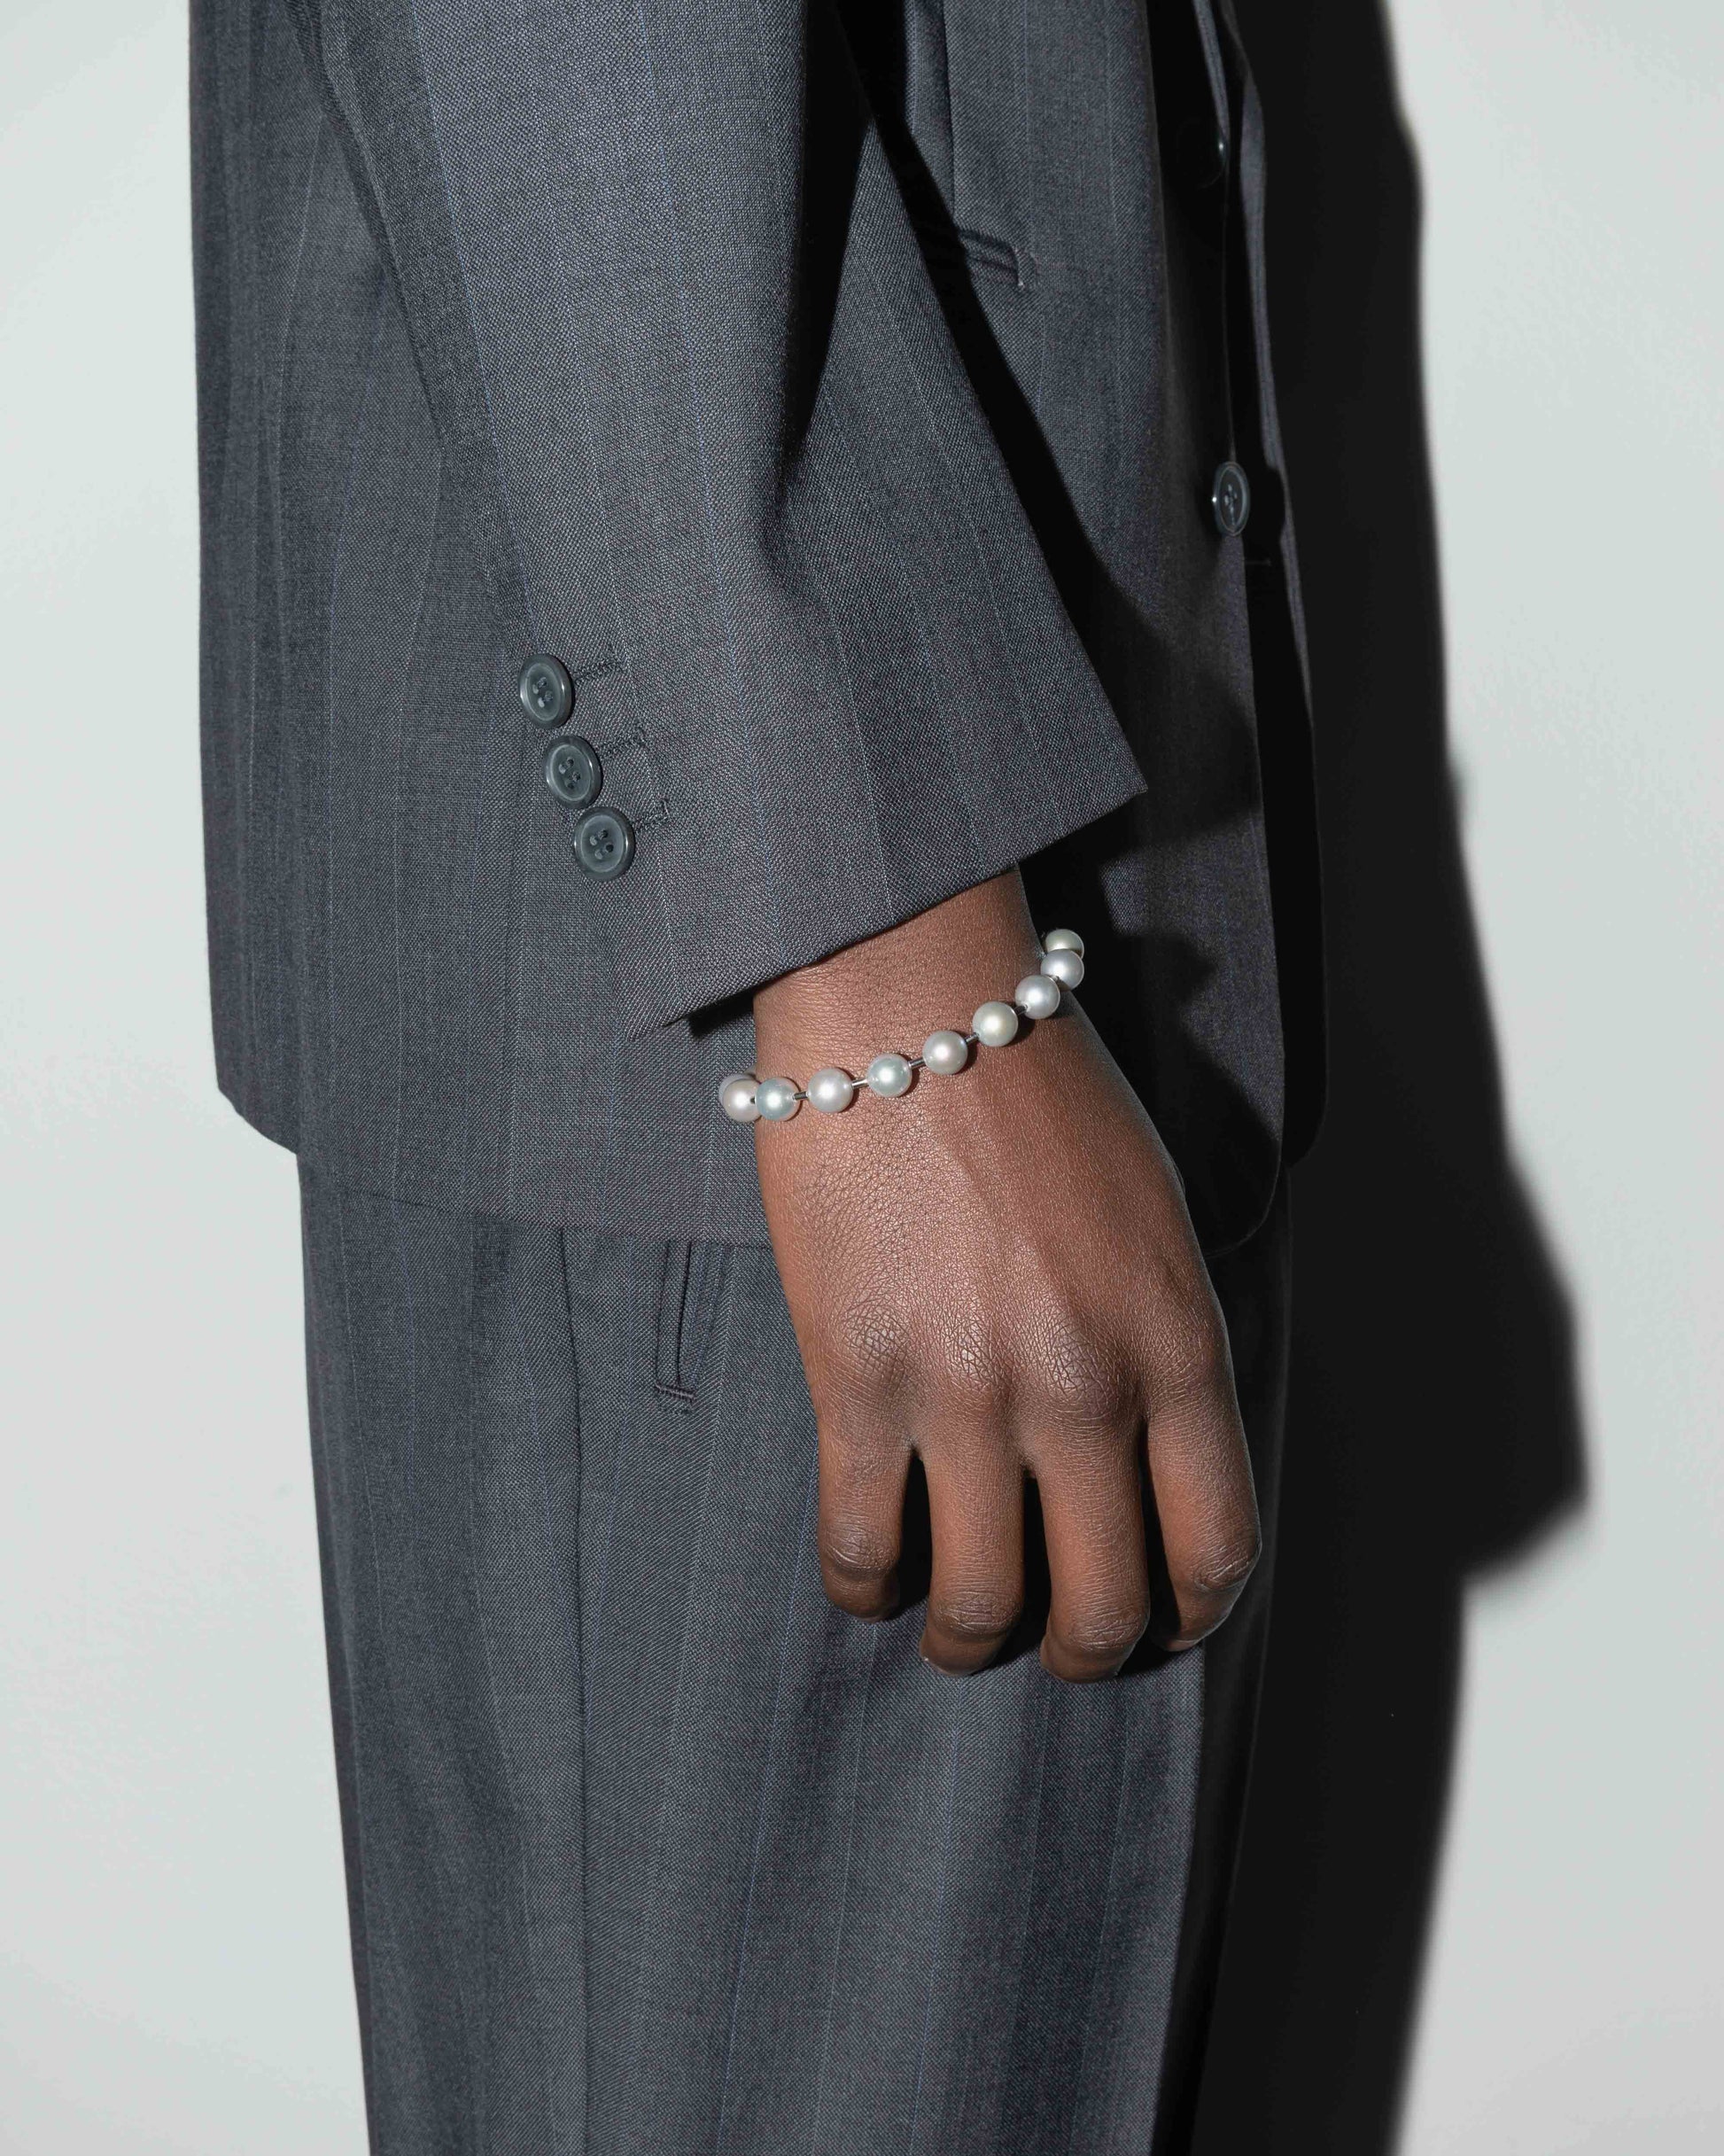 street style man wearing Natural Indonesian freshwater pearls bracelet with ematite spacers and 18k white gold coated carabiner clasp with logo. 9mm natural freshwater pearls in silver grey.